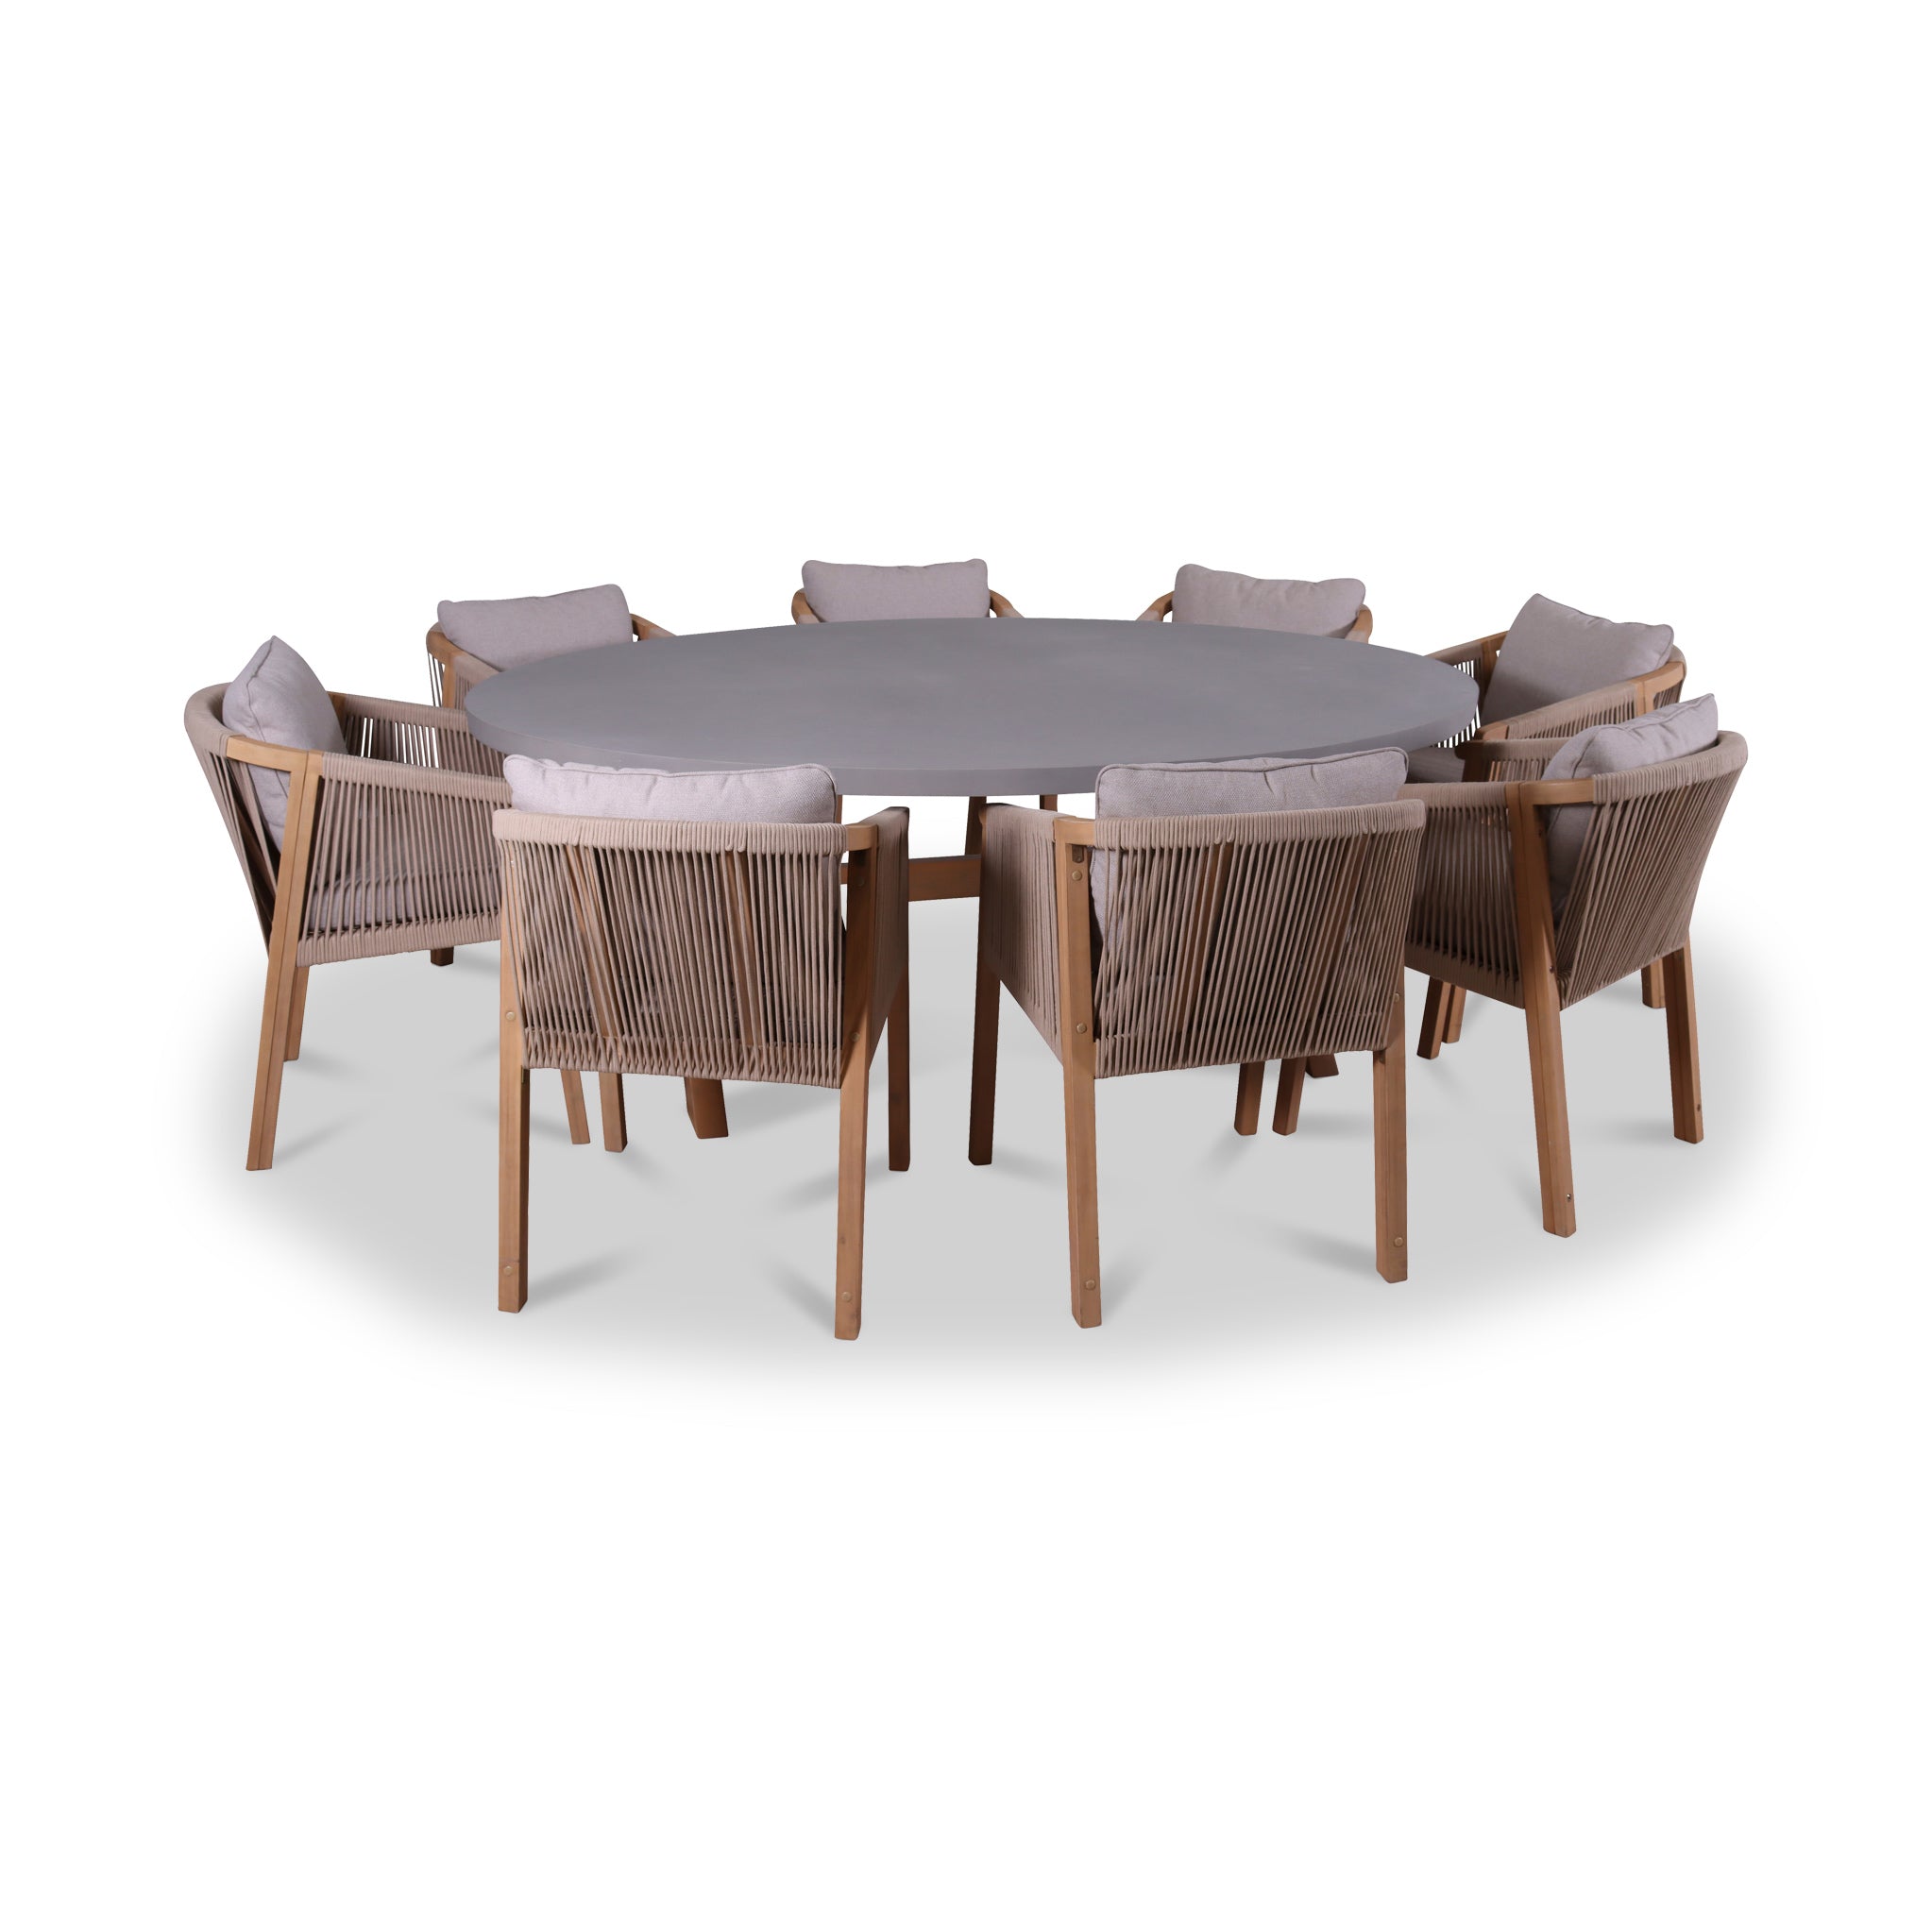 Luna 200x145cm Ellipse Concrete Table With 8 Roma Dining Chairs Roseland